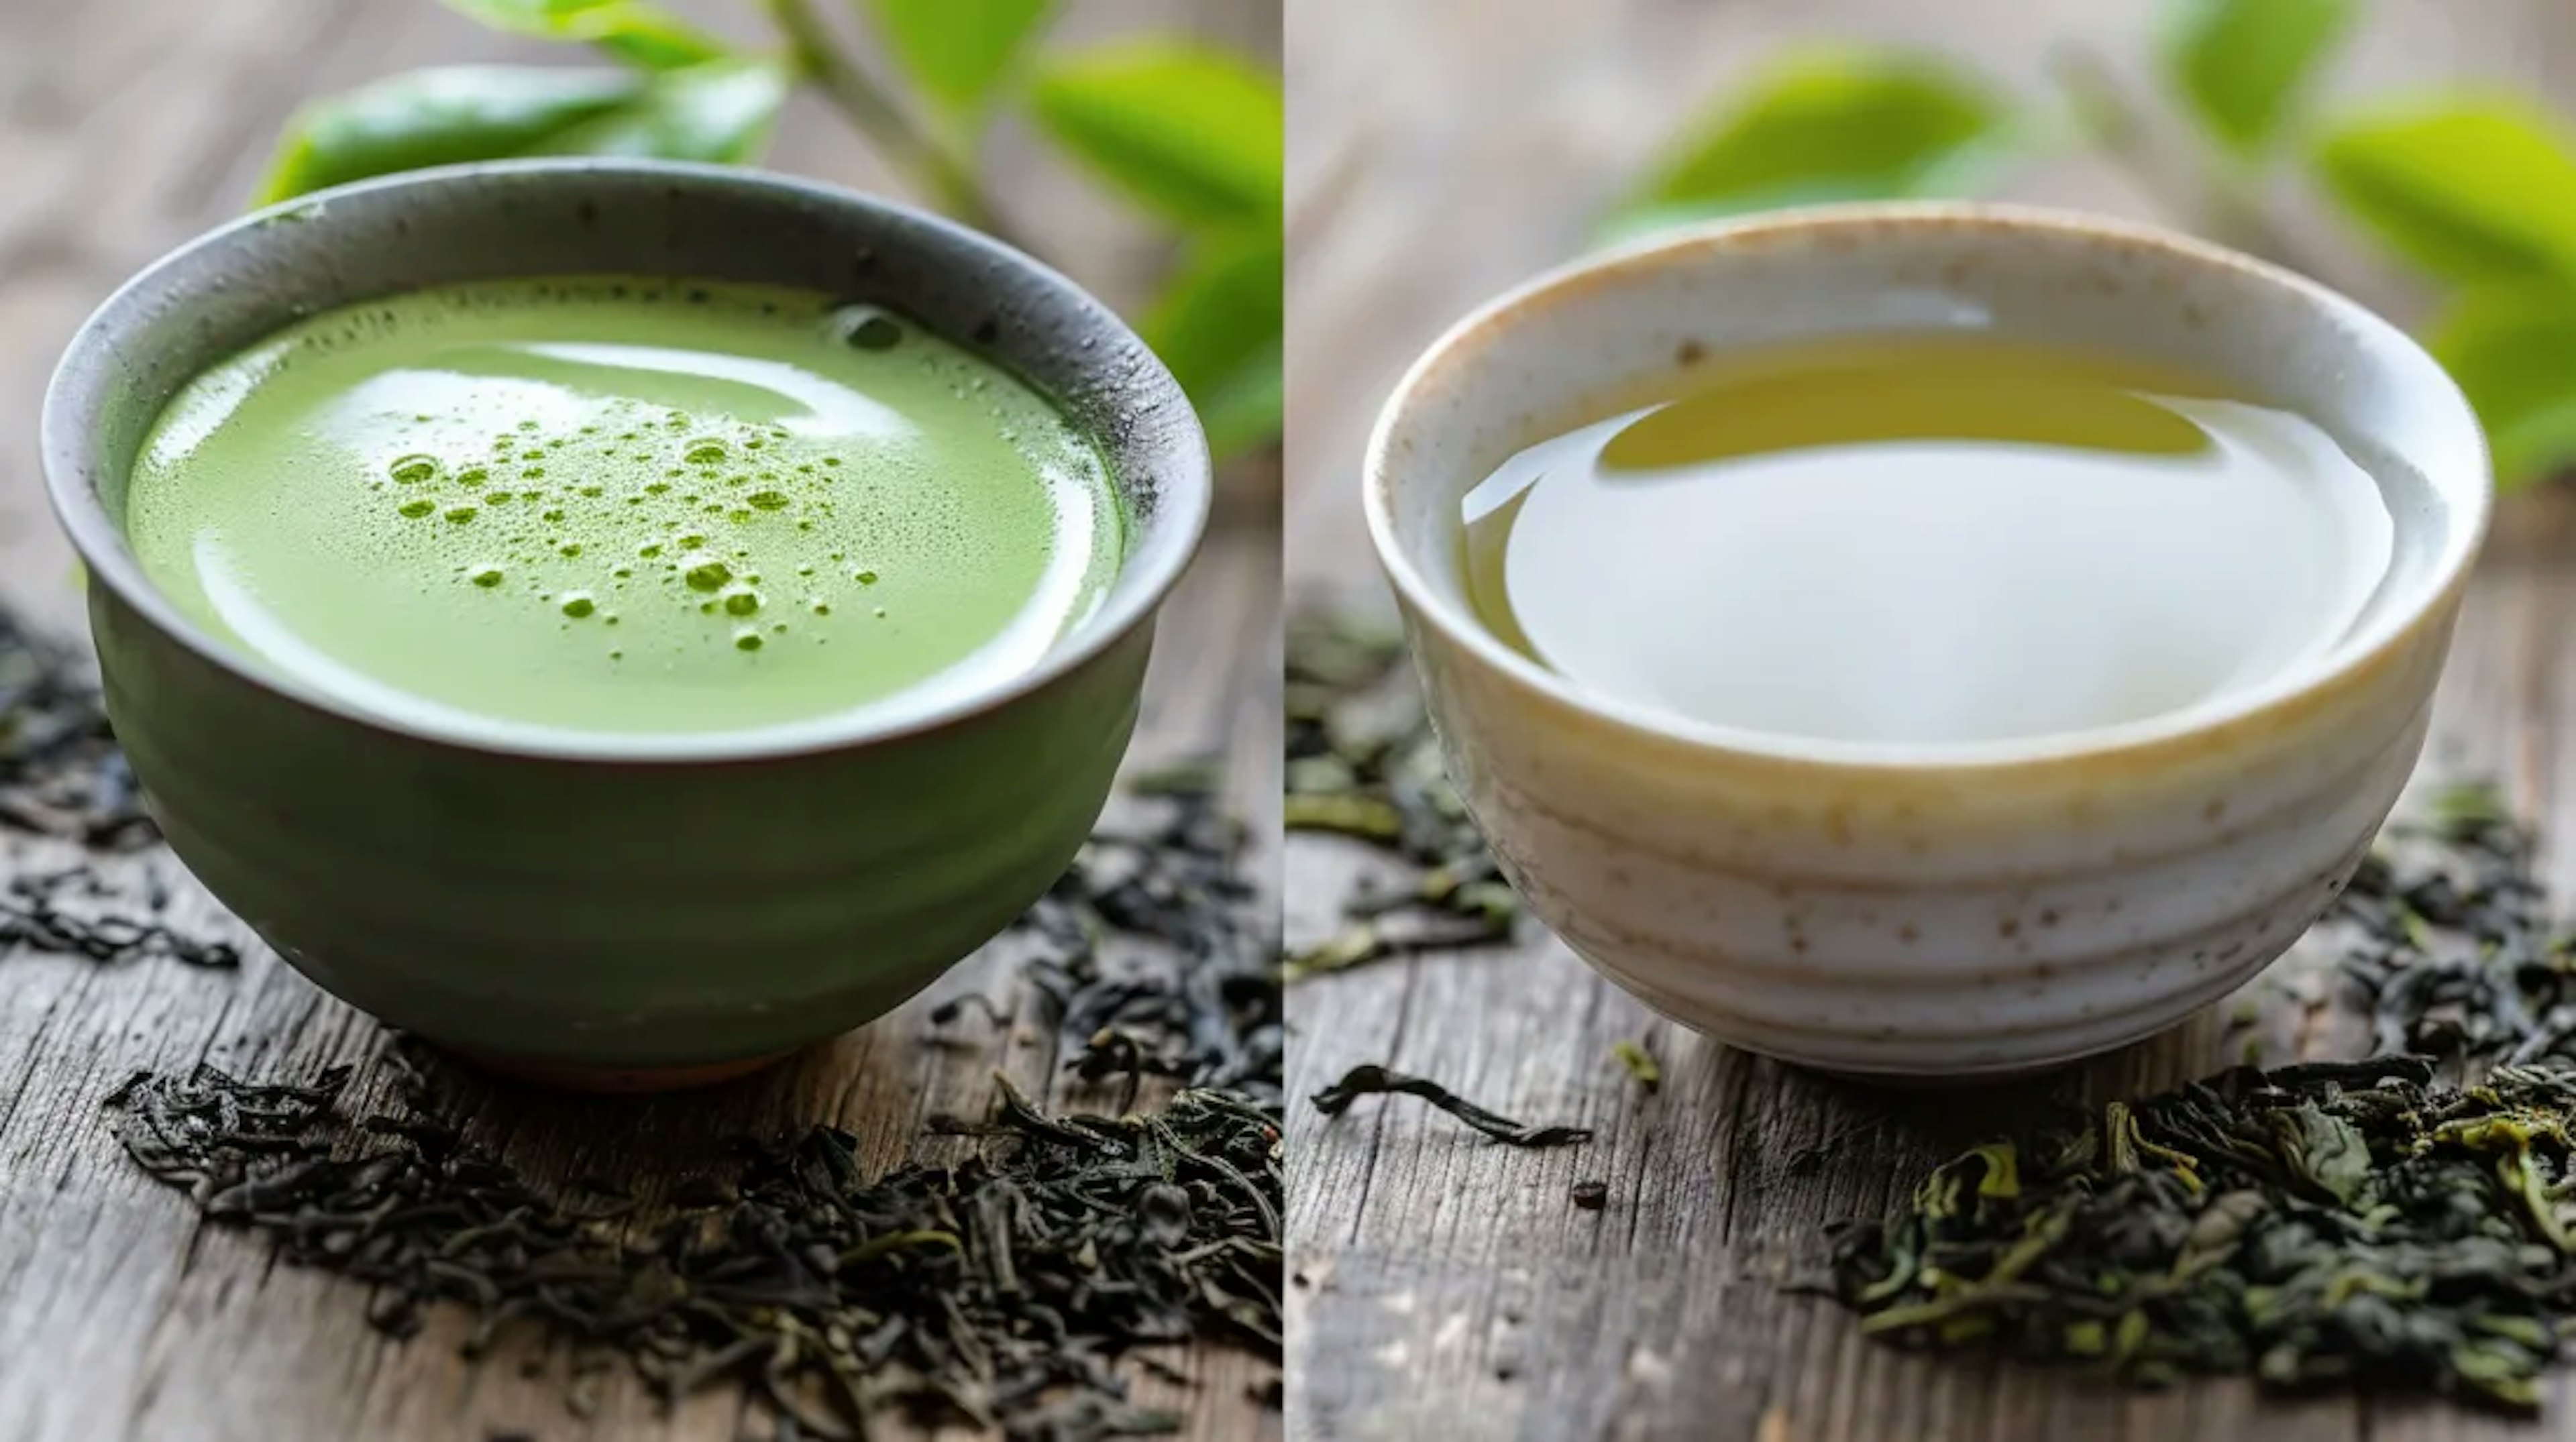 Two cups of Japanese green tea, one matcha and one sencha, on a traditional Japanese mat